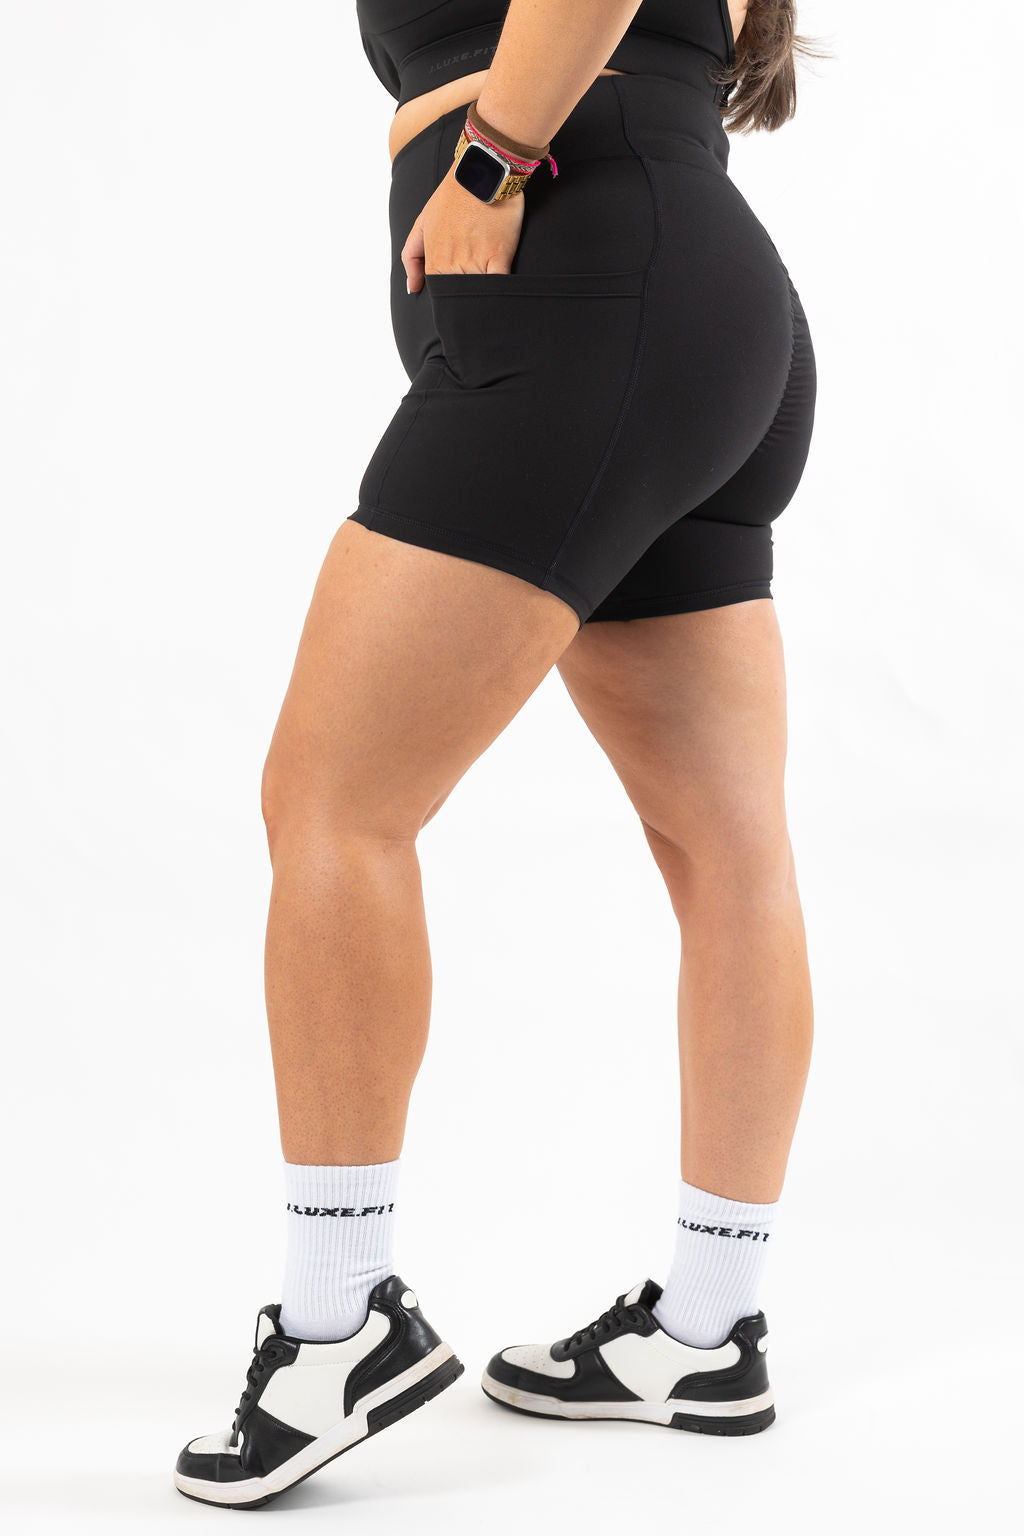 Core High Waisted Black Shorts With Pockets - J.LUXE.FIT